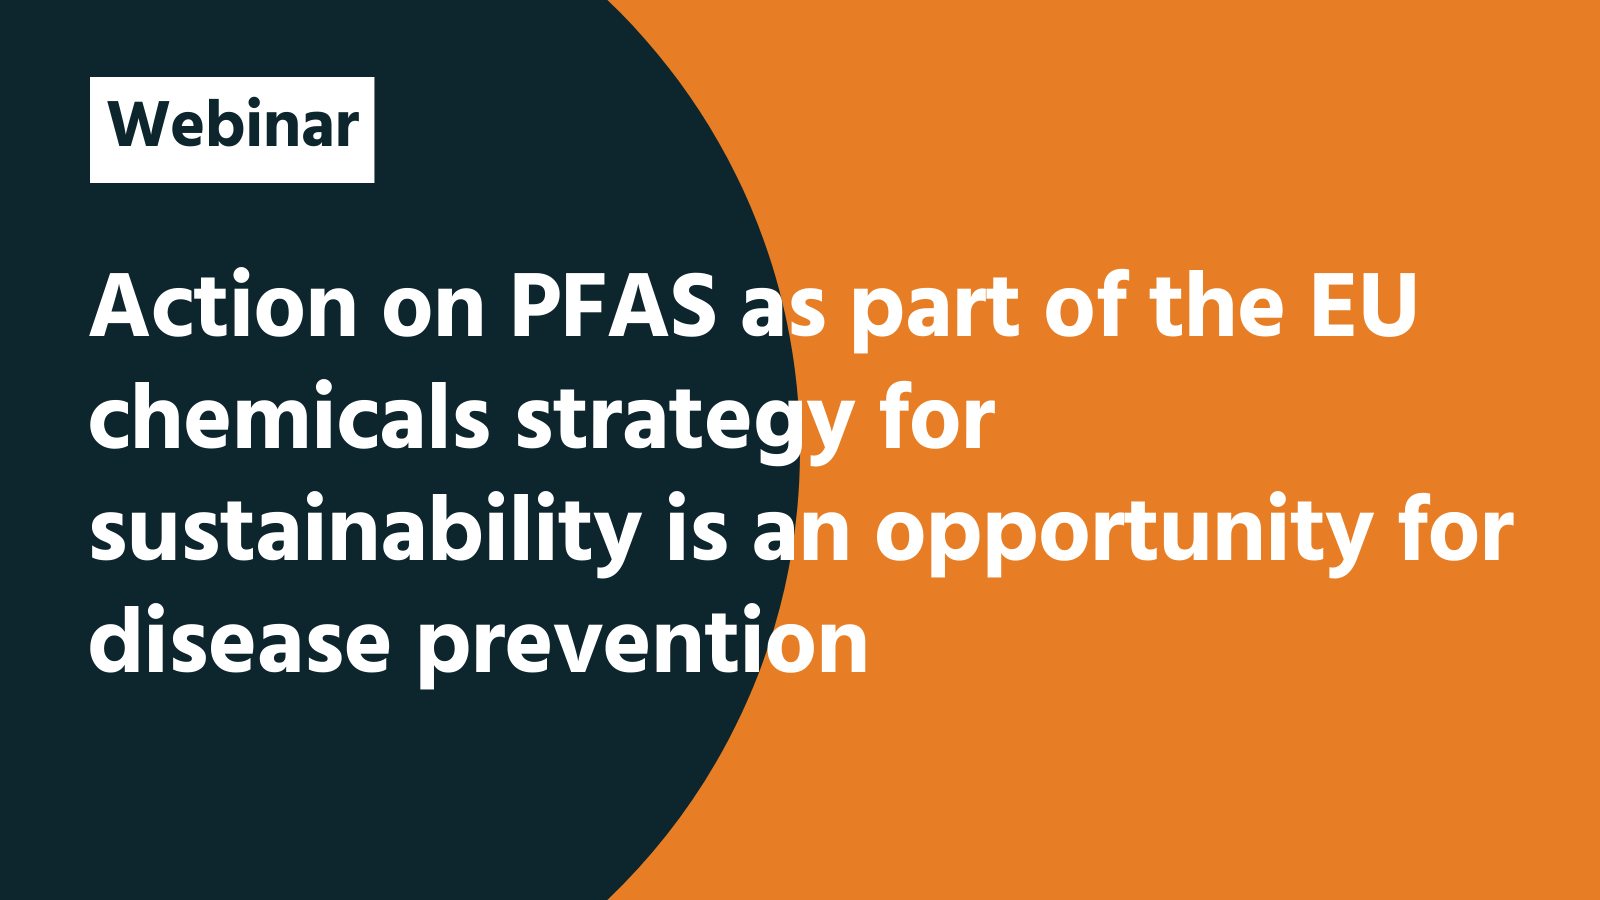 Webinar: Action on PFAS as part of the EU chemicals strategy for sustainability is an opportunity for disease prevention